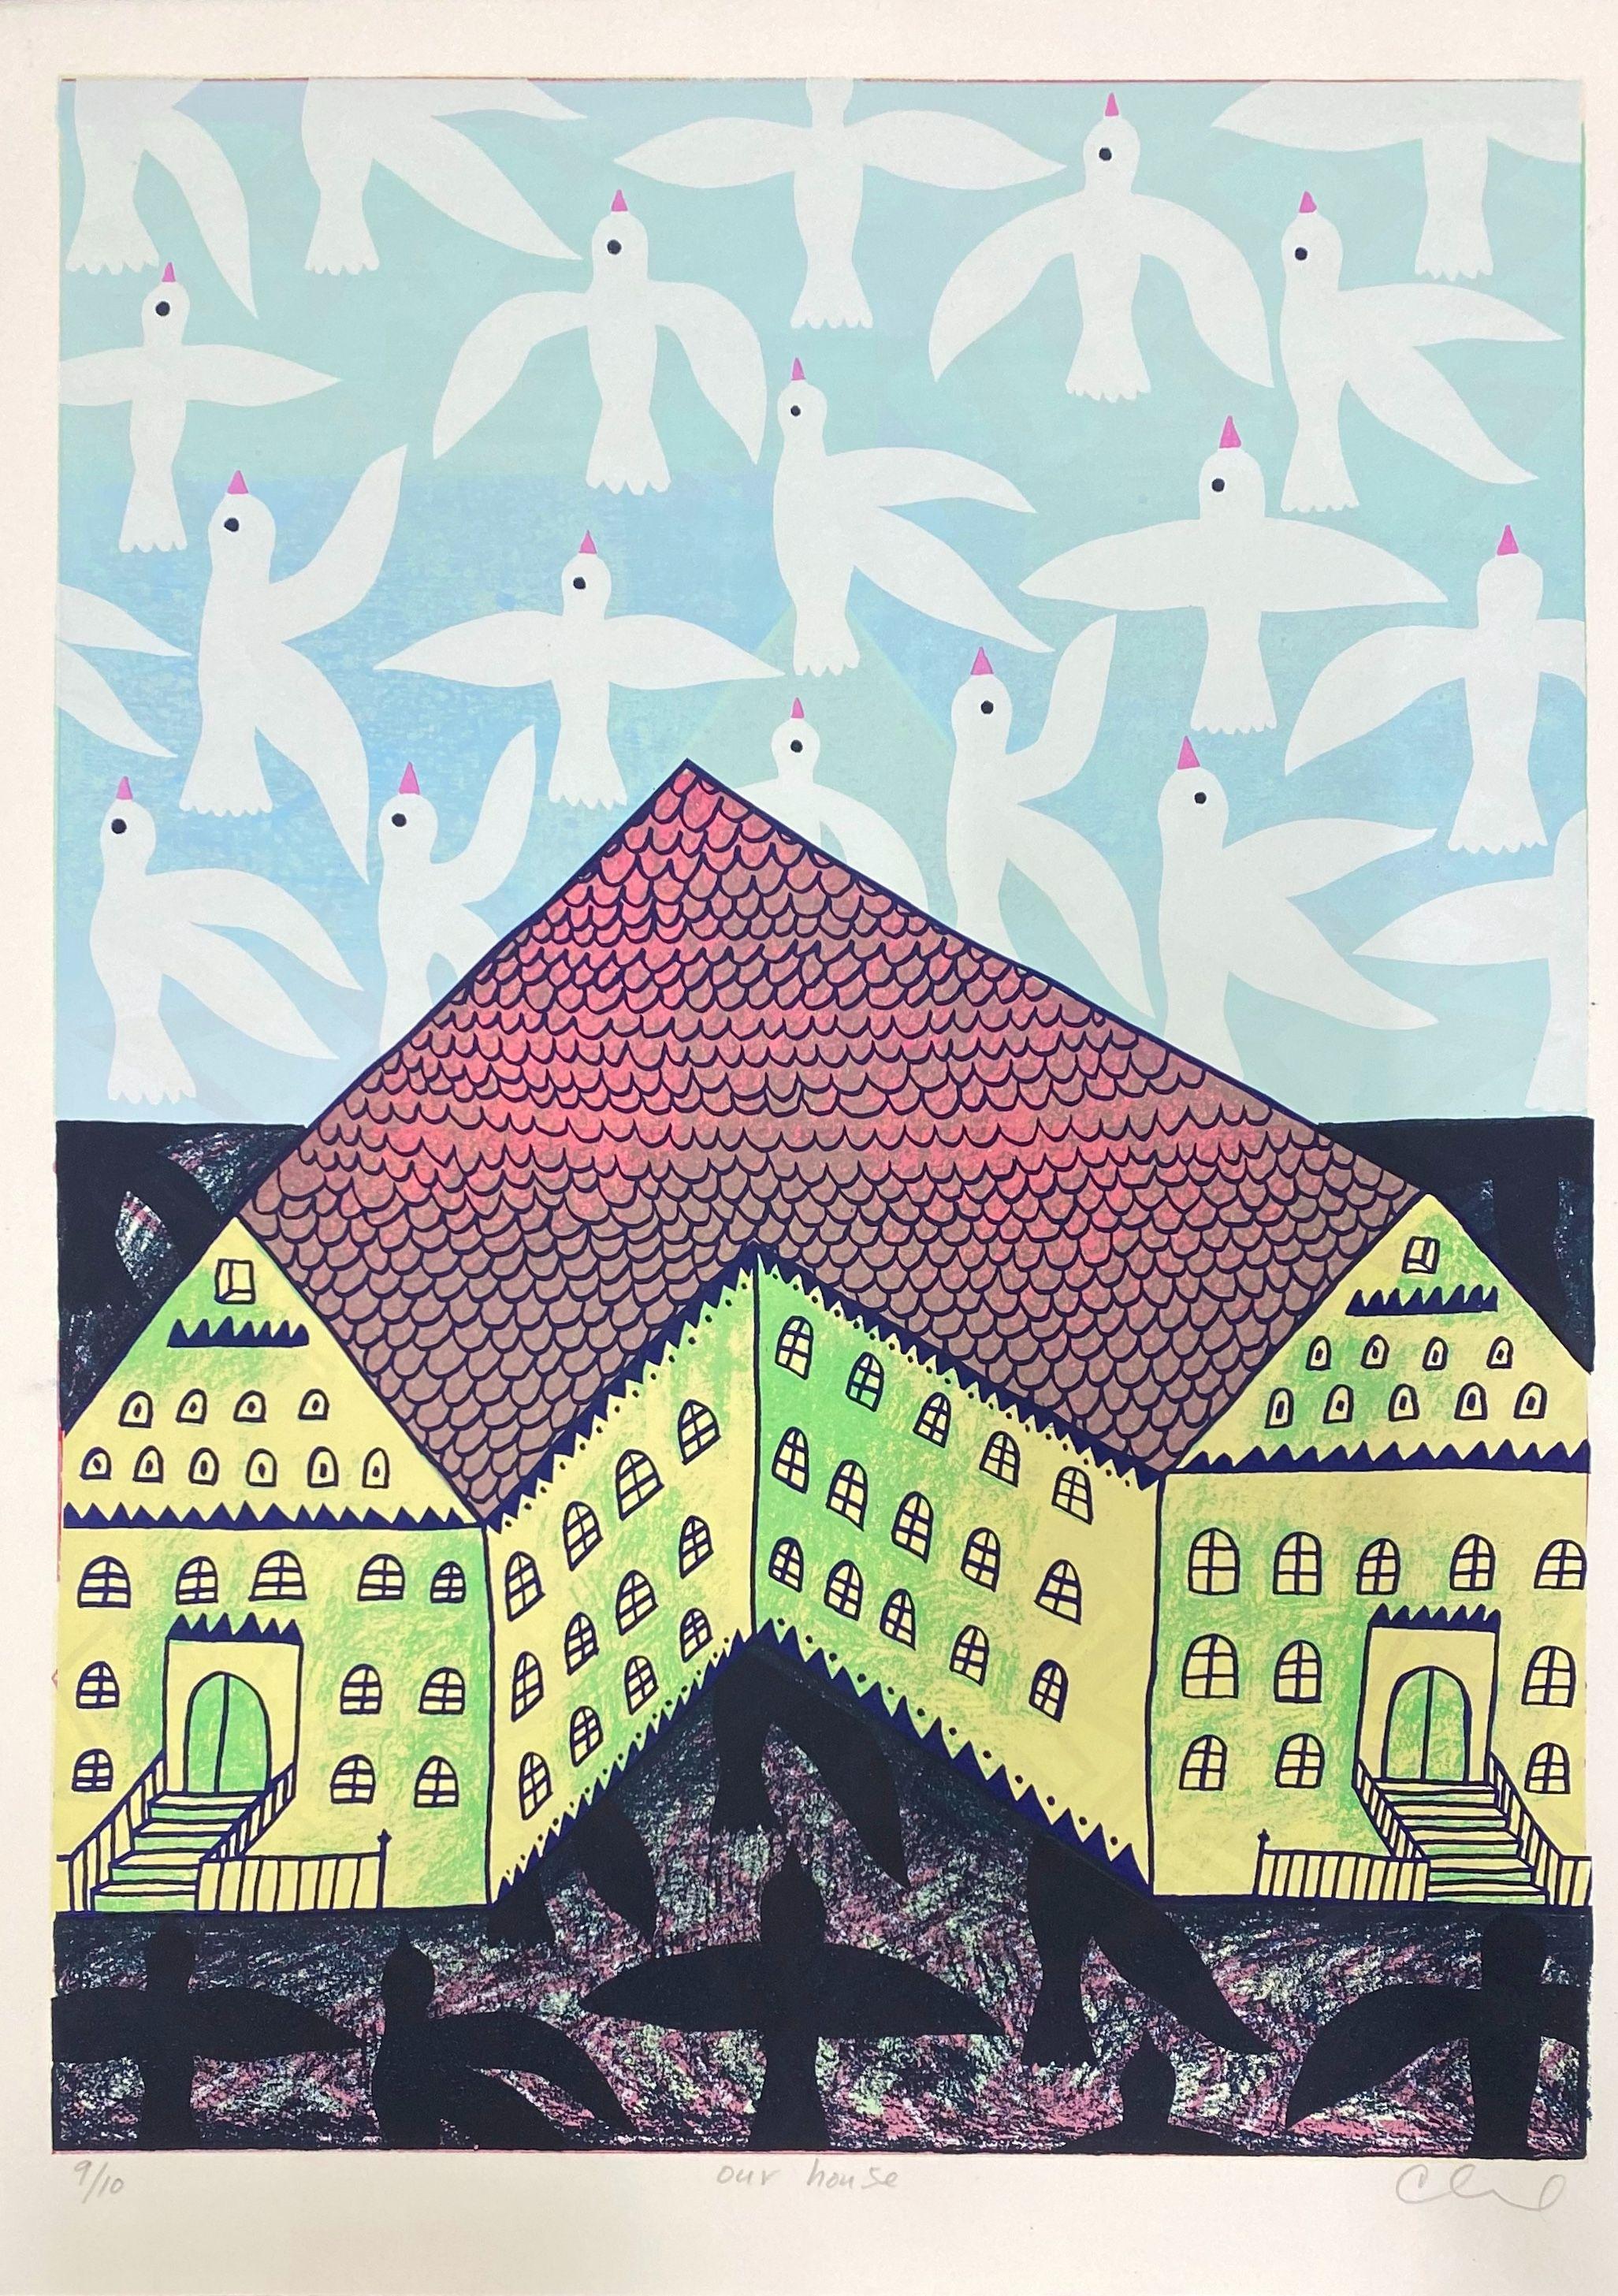 Chadwick Tolley Abstract Print - Our House (2/10)